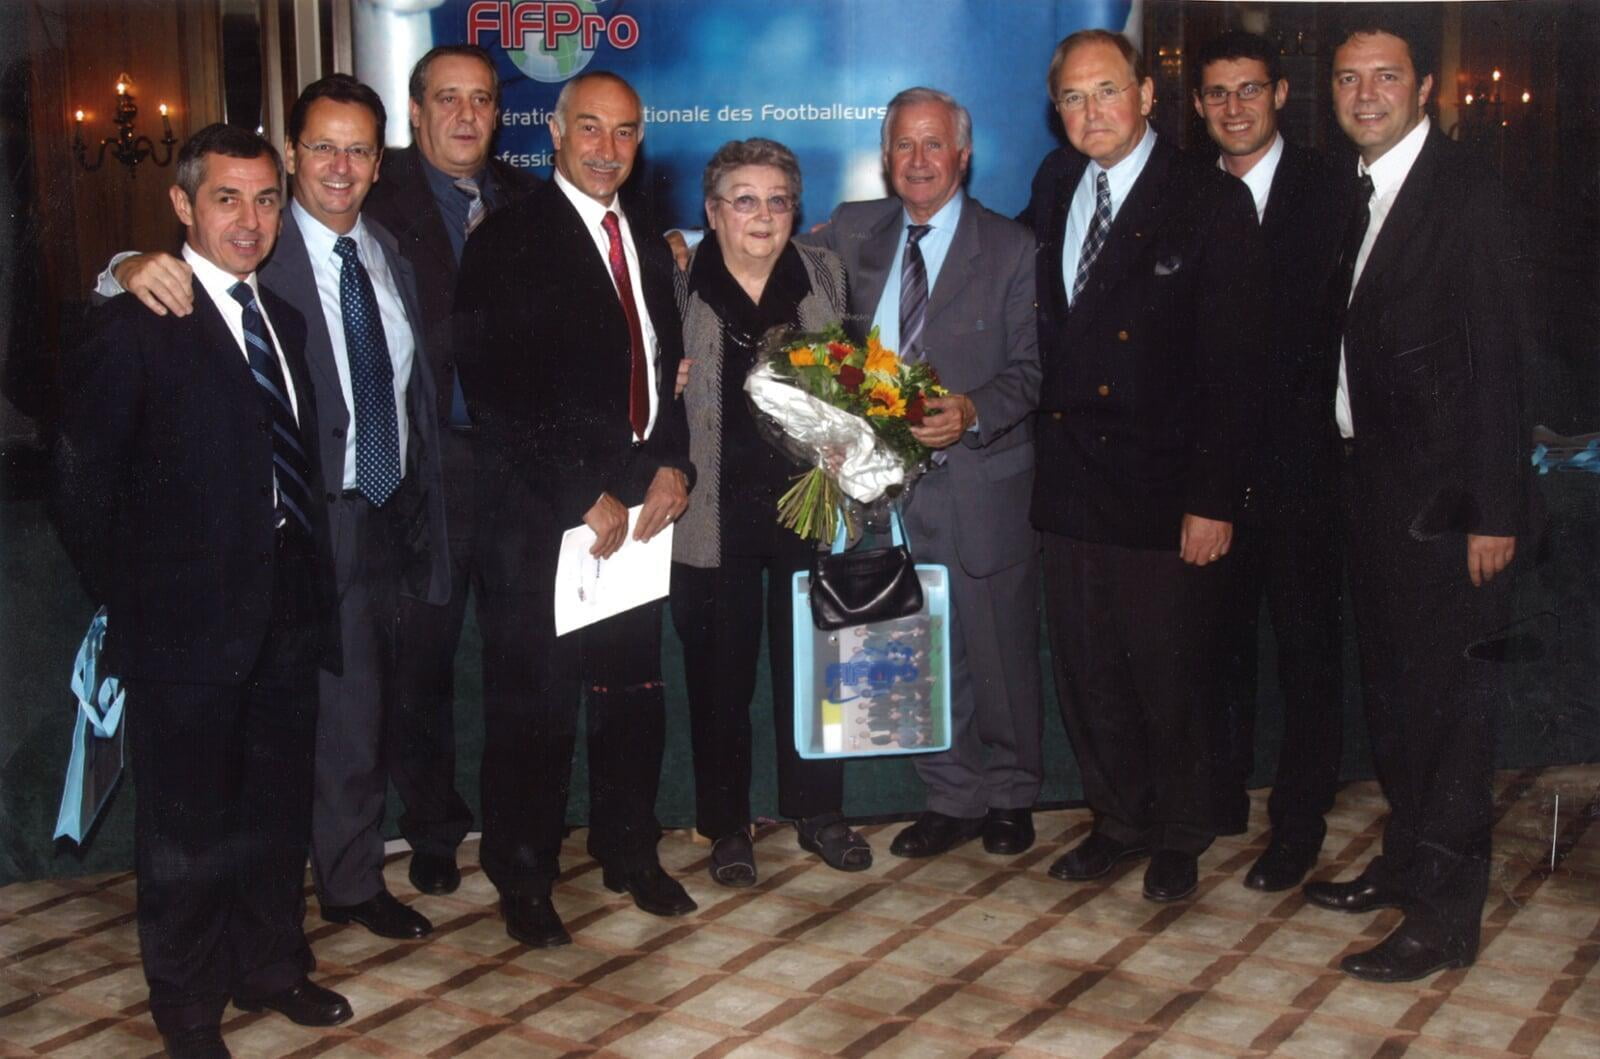 In 2005, at the 40th anniversary of FIFPRO